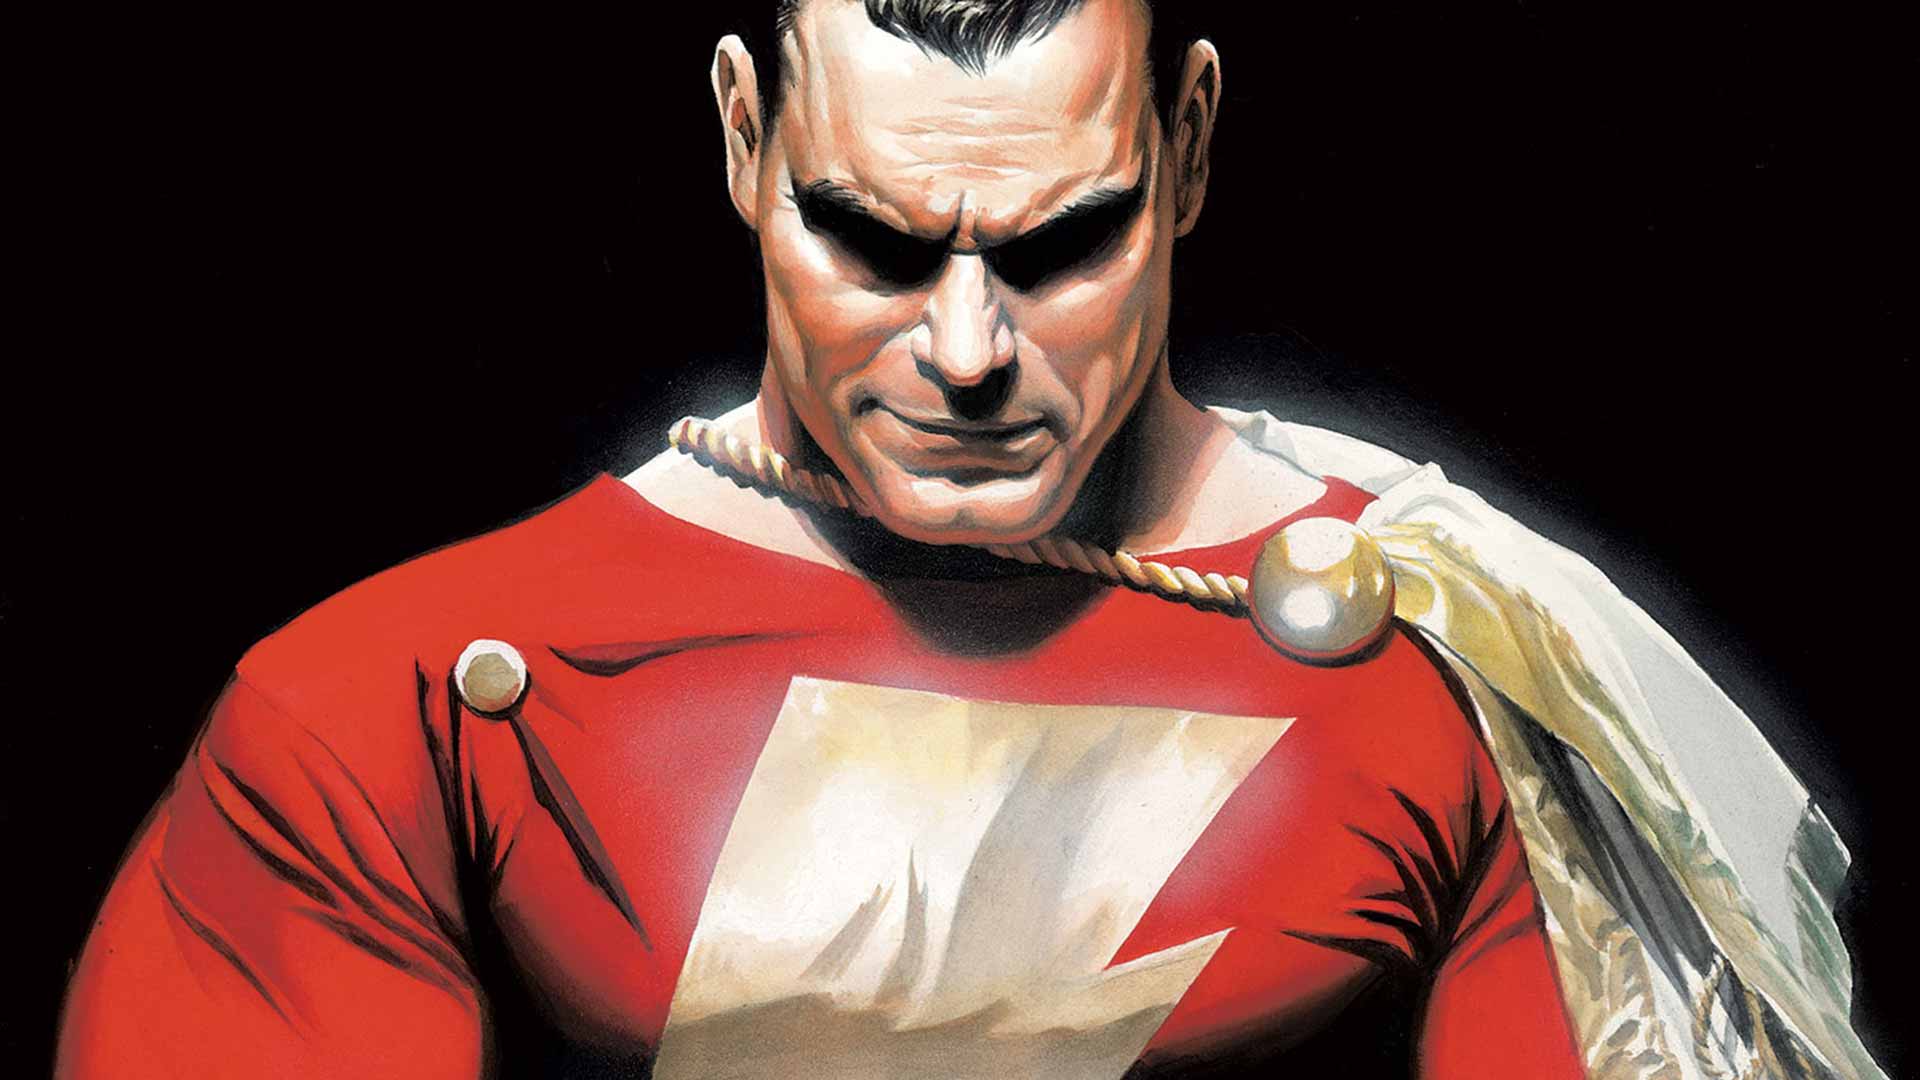 Why does Shazam have a short cape?!?